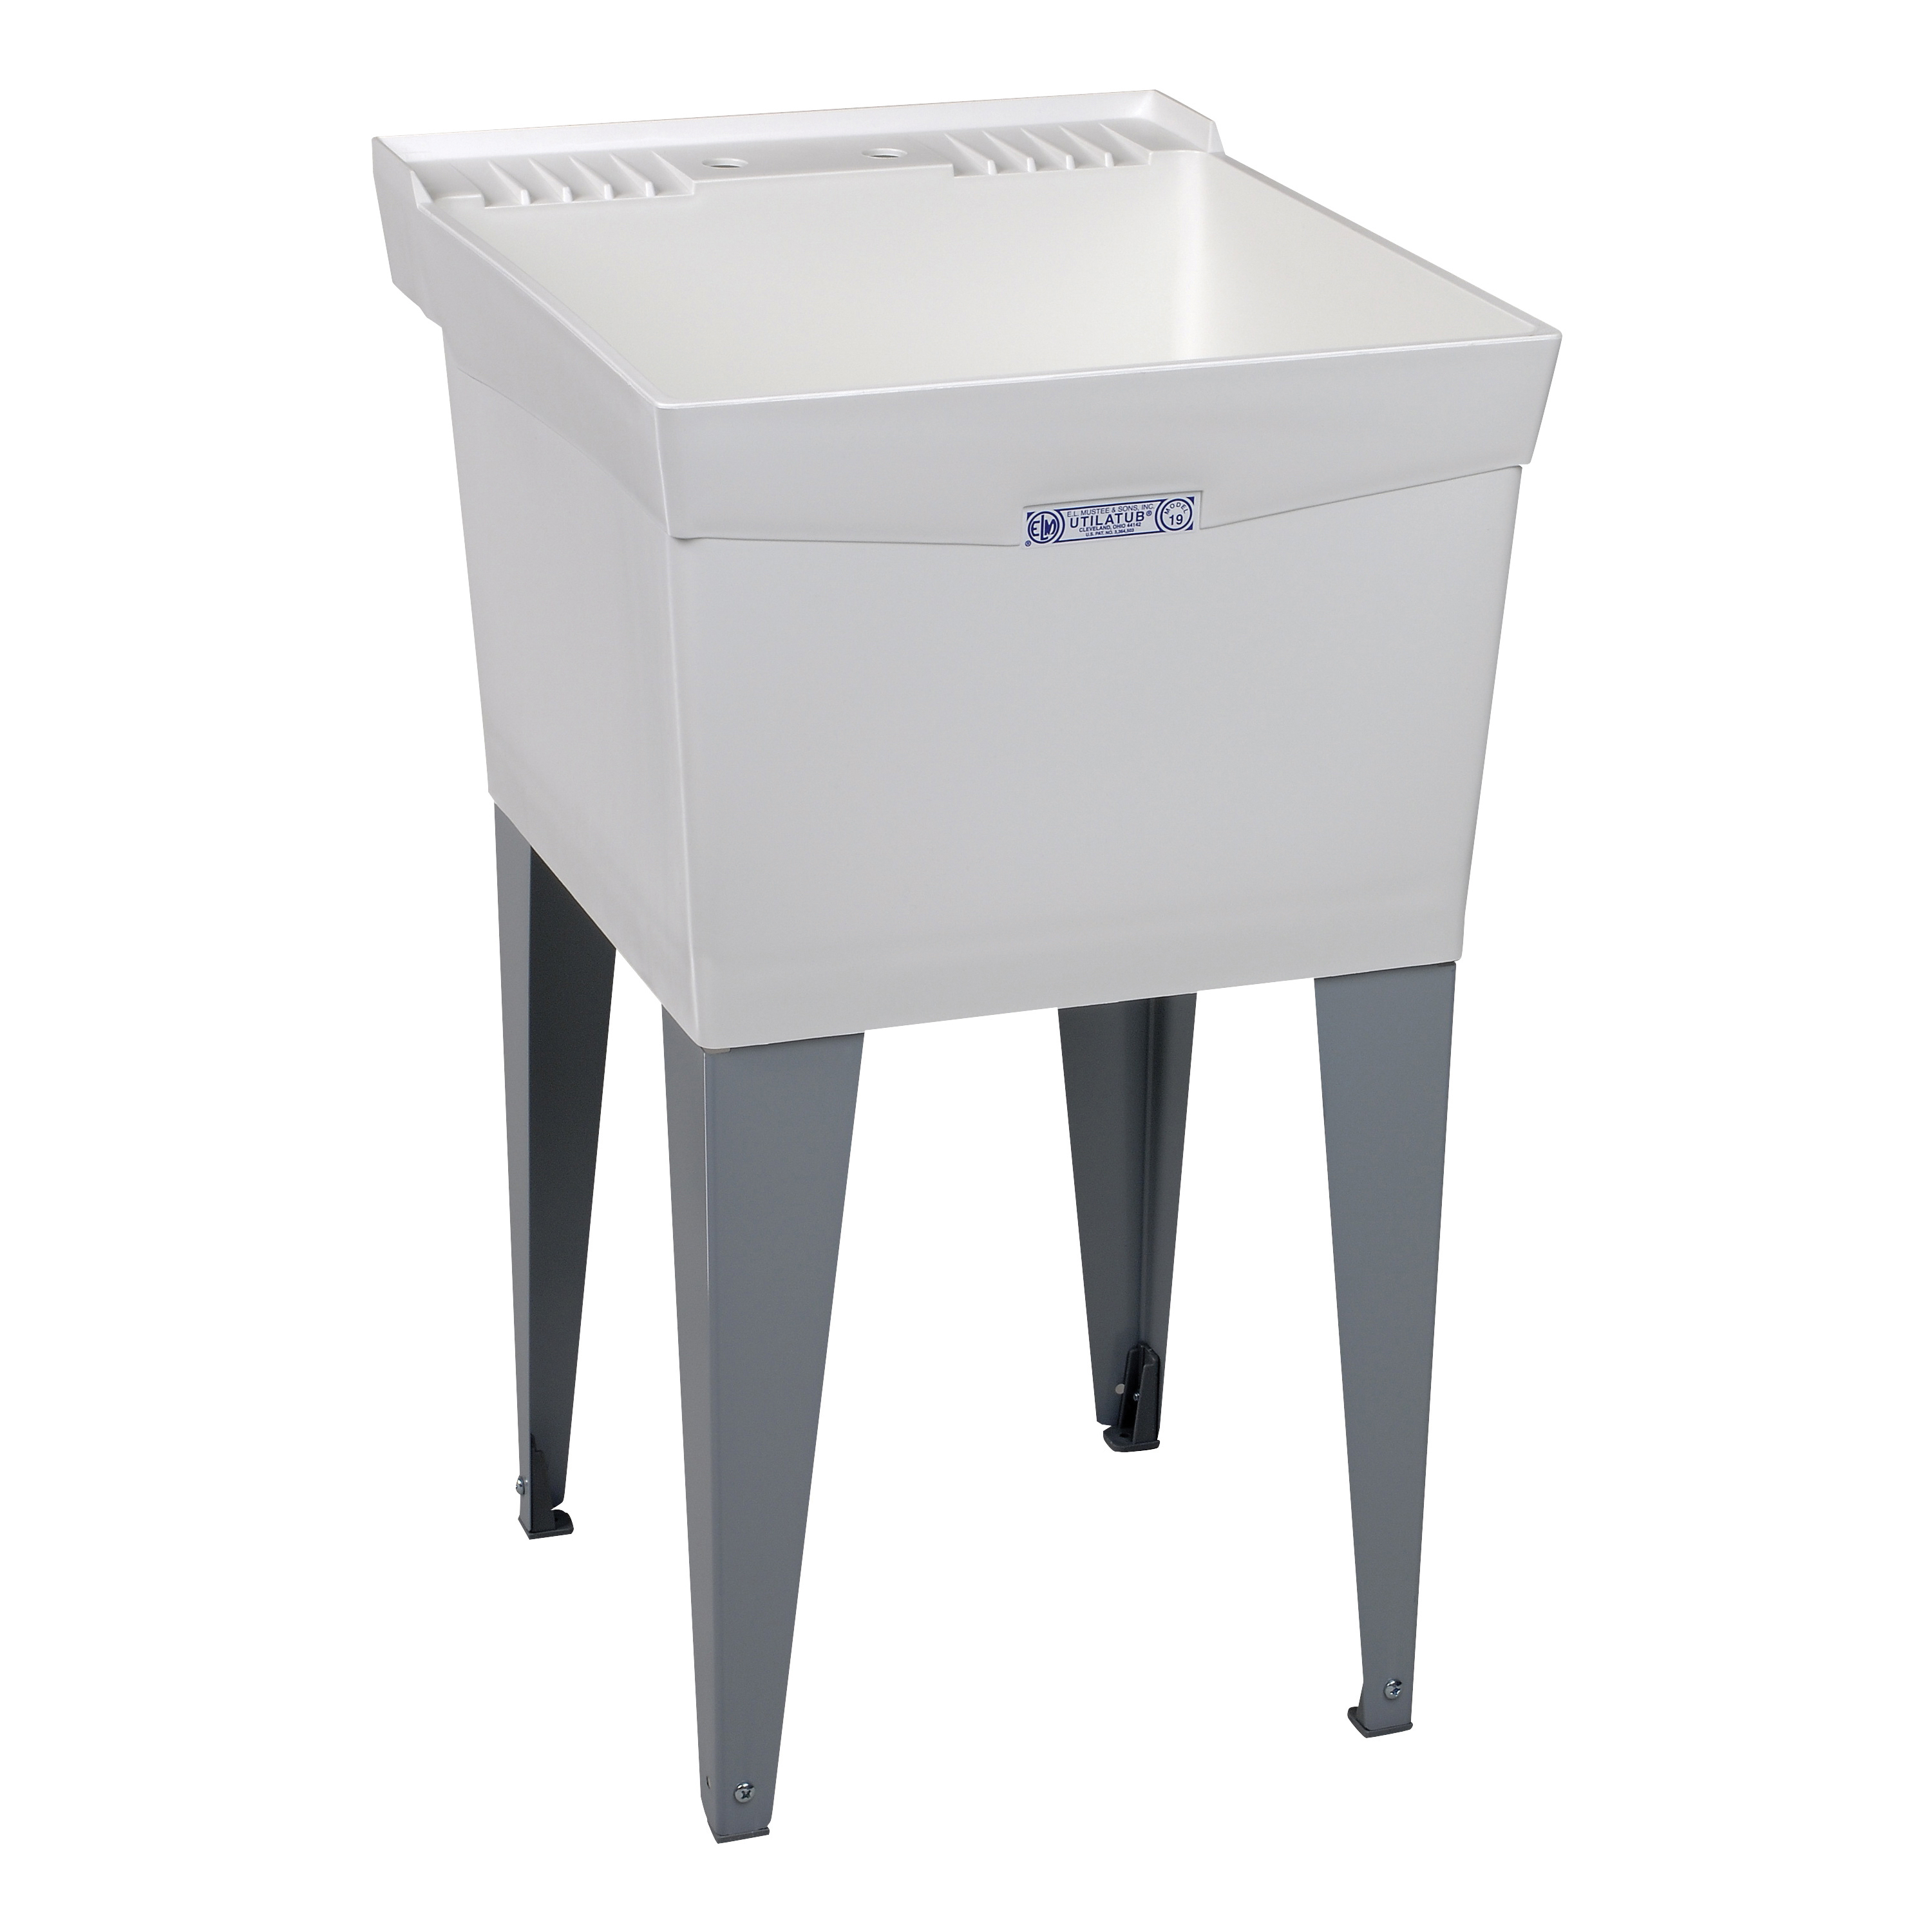 UTILATUB Series 19F Laundry Tub, 18 gal Capacity, 2-Deck Hole, 24 in OAW, 24 in OAD, 20 in OAH, Thermoplastic